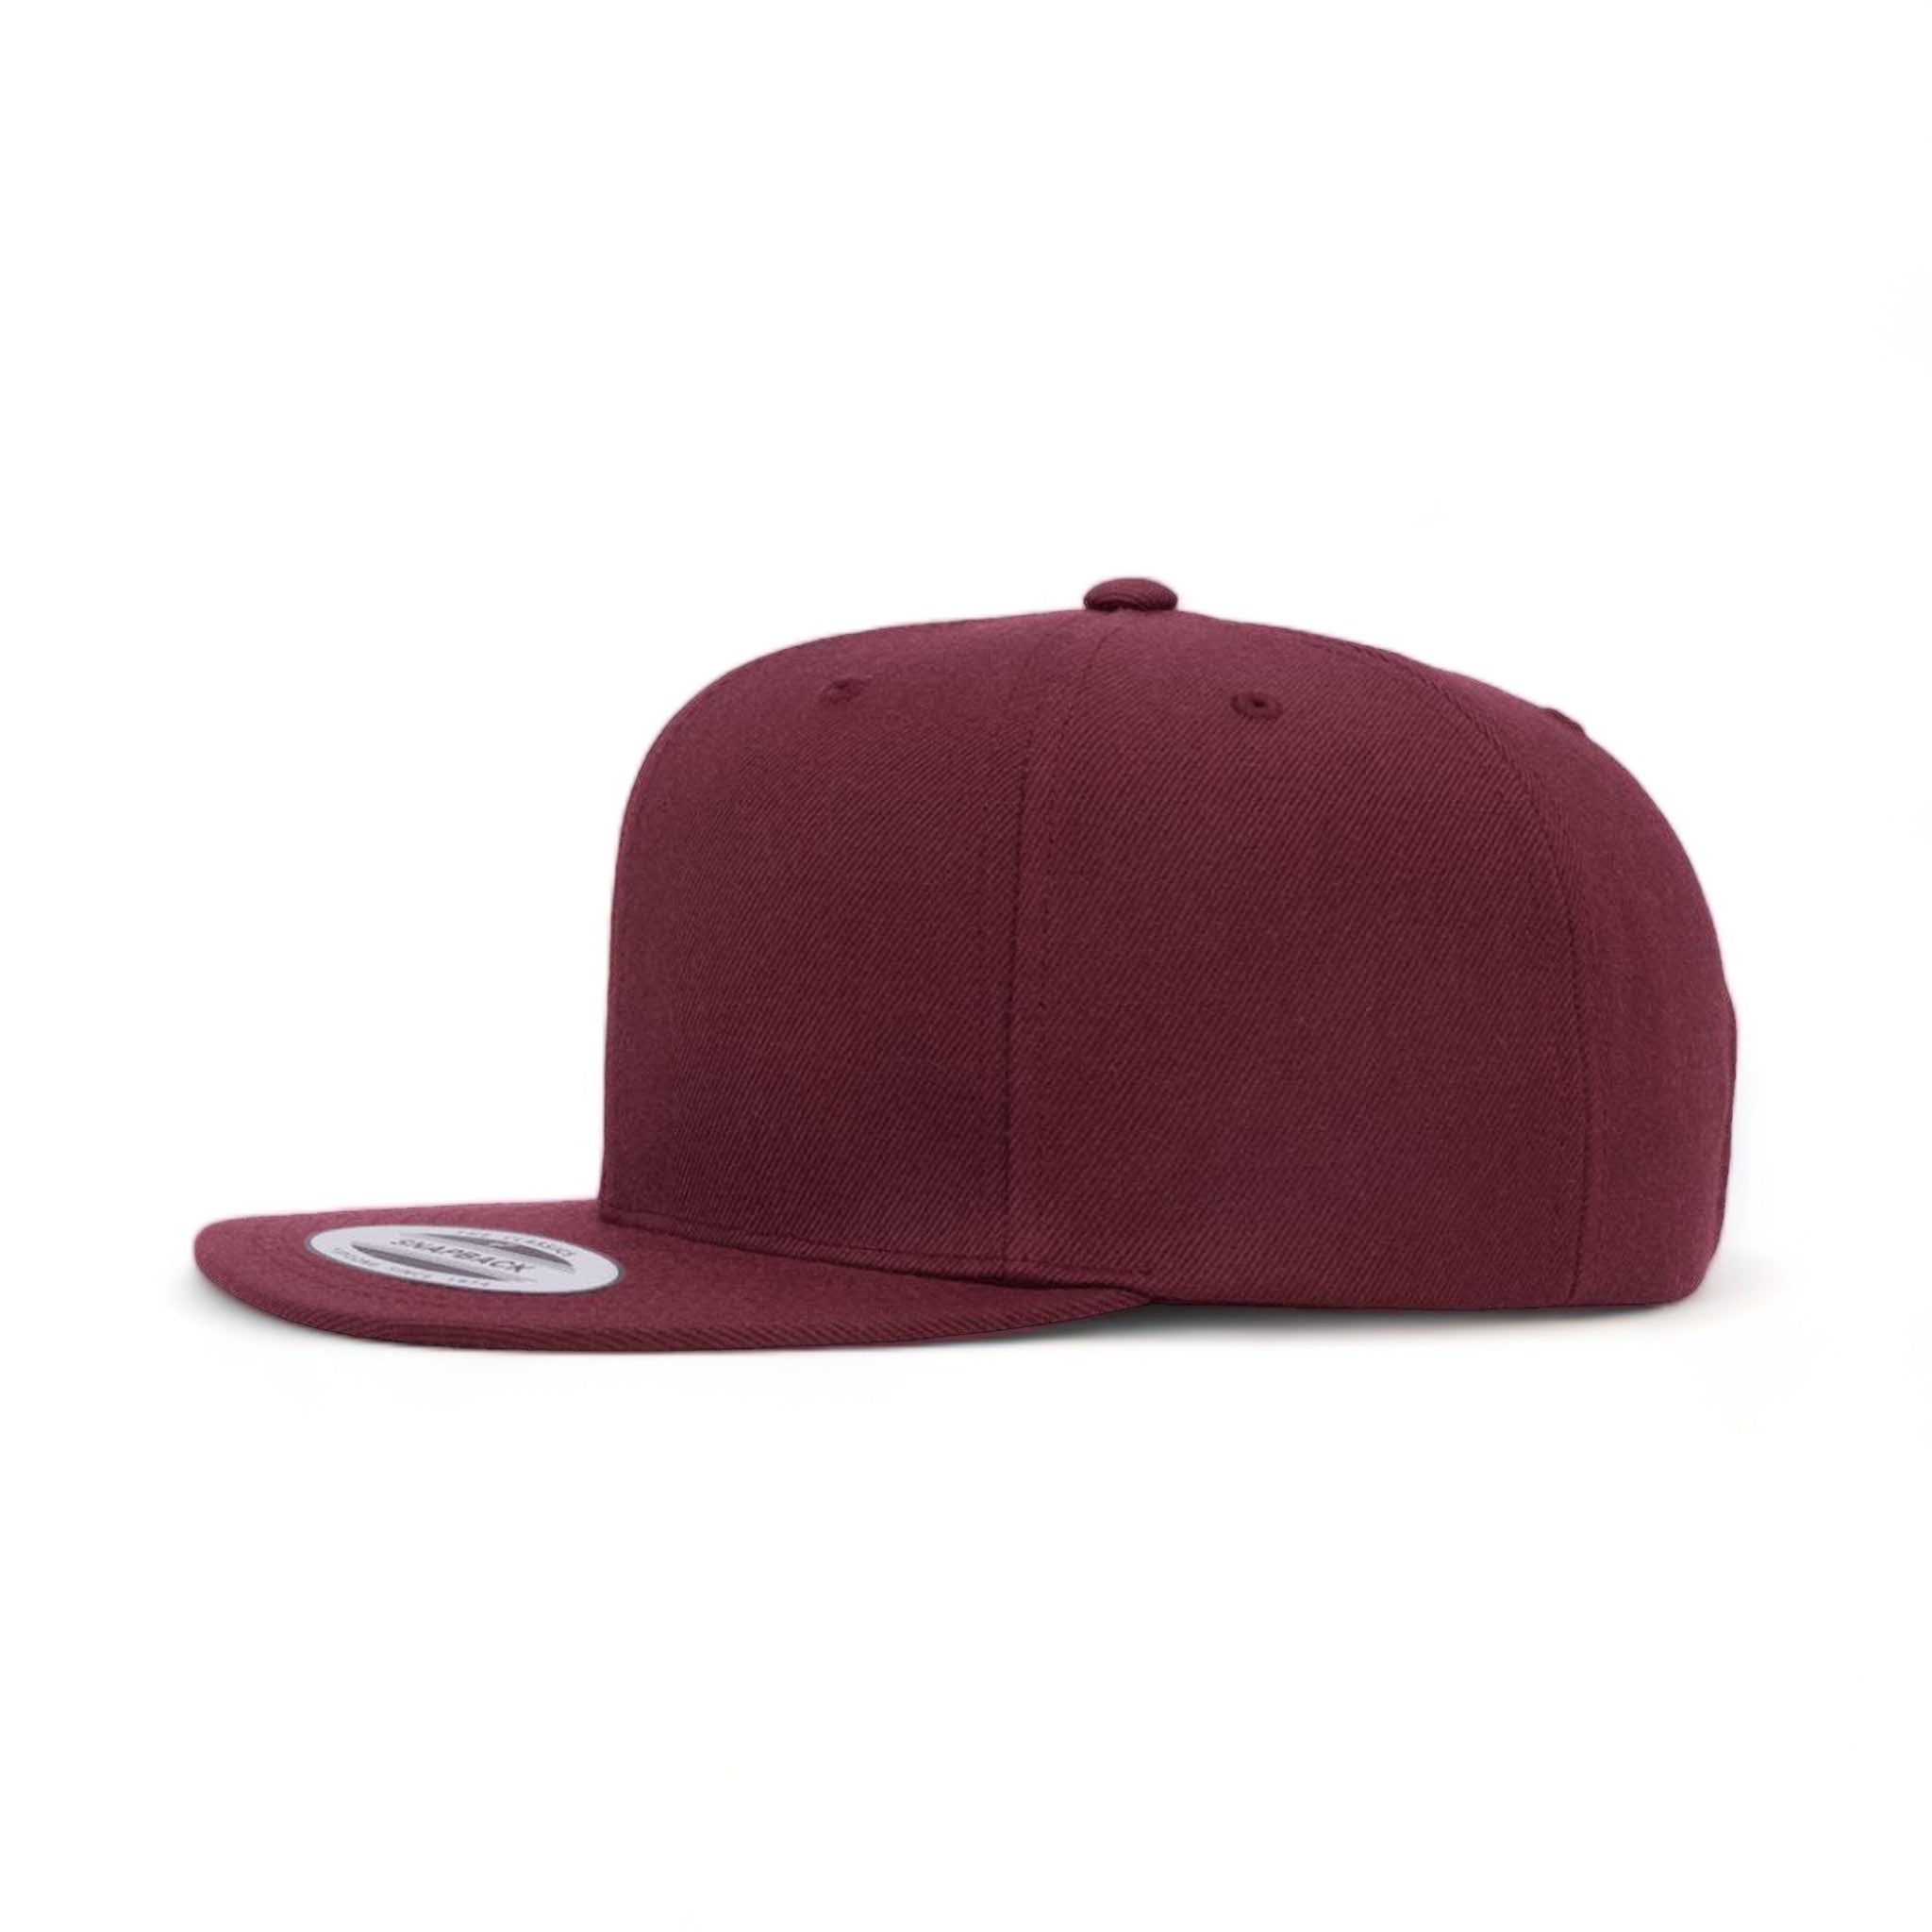 Side view of YP Classics 6089M custom hat in maroon